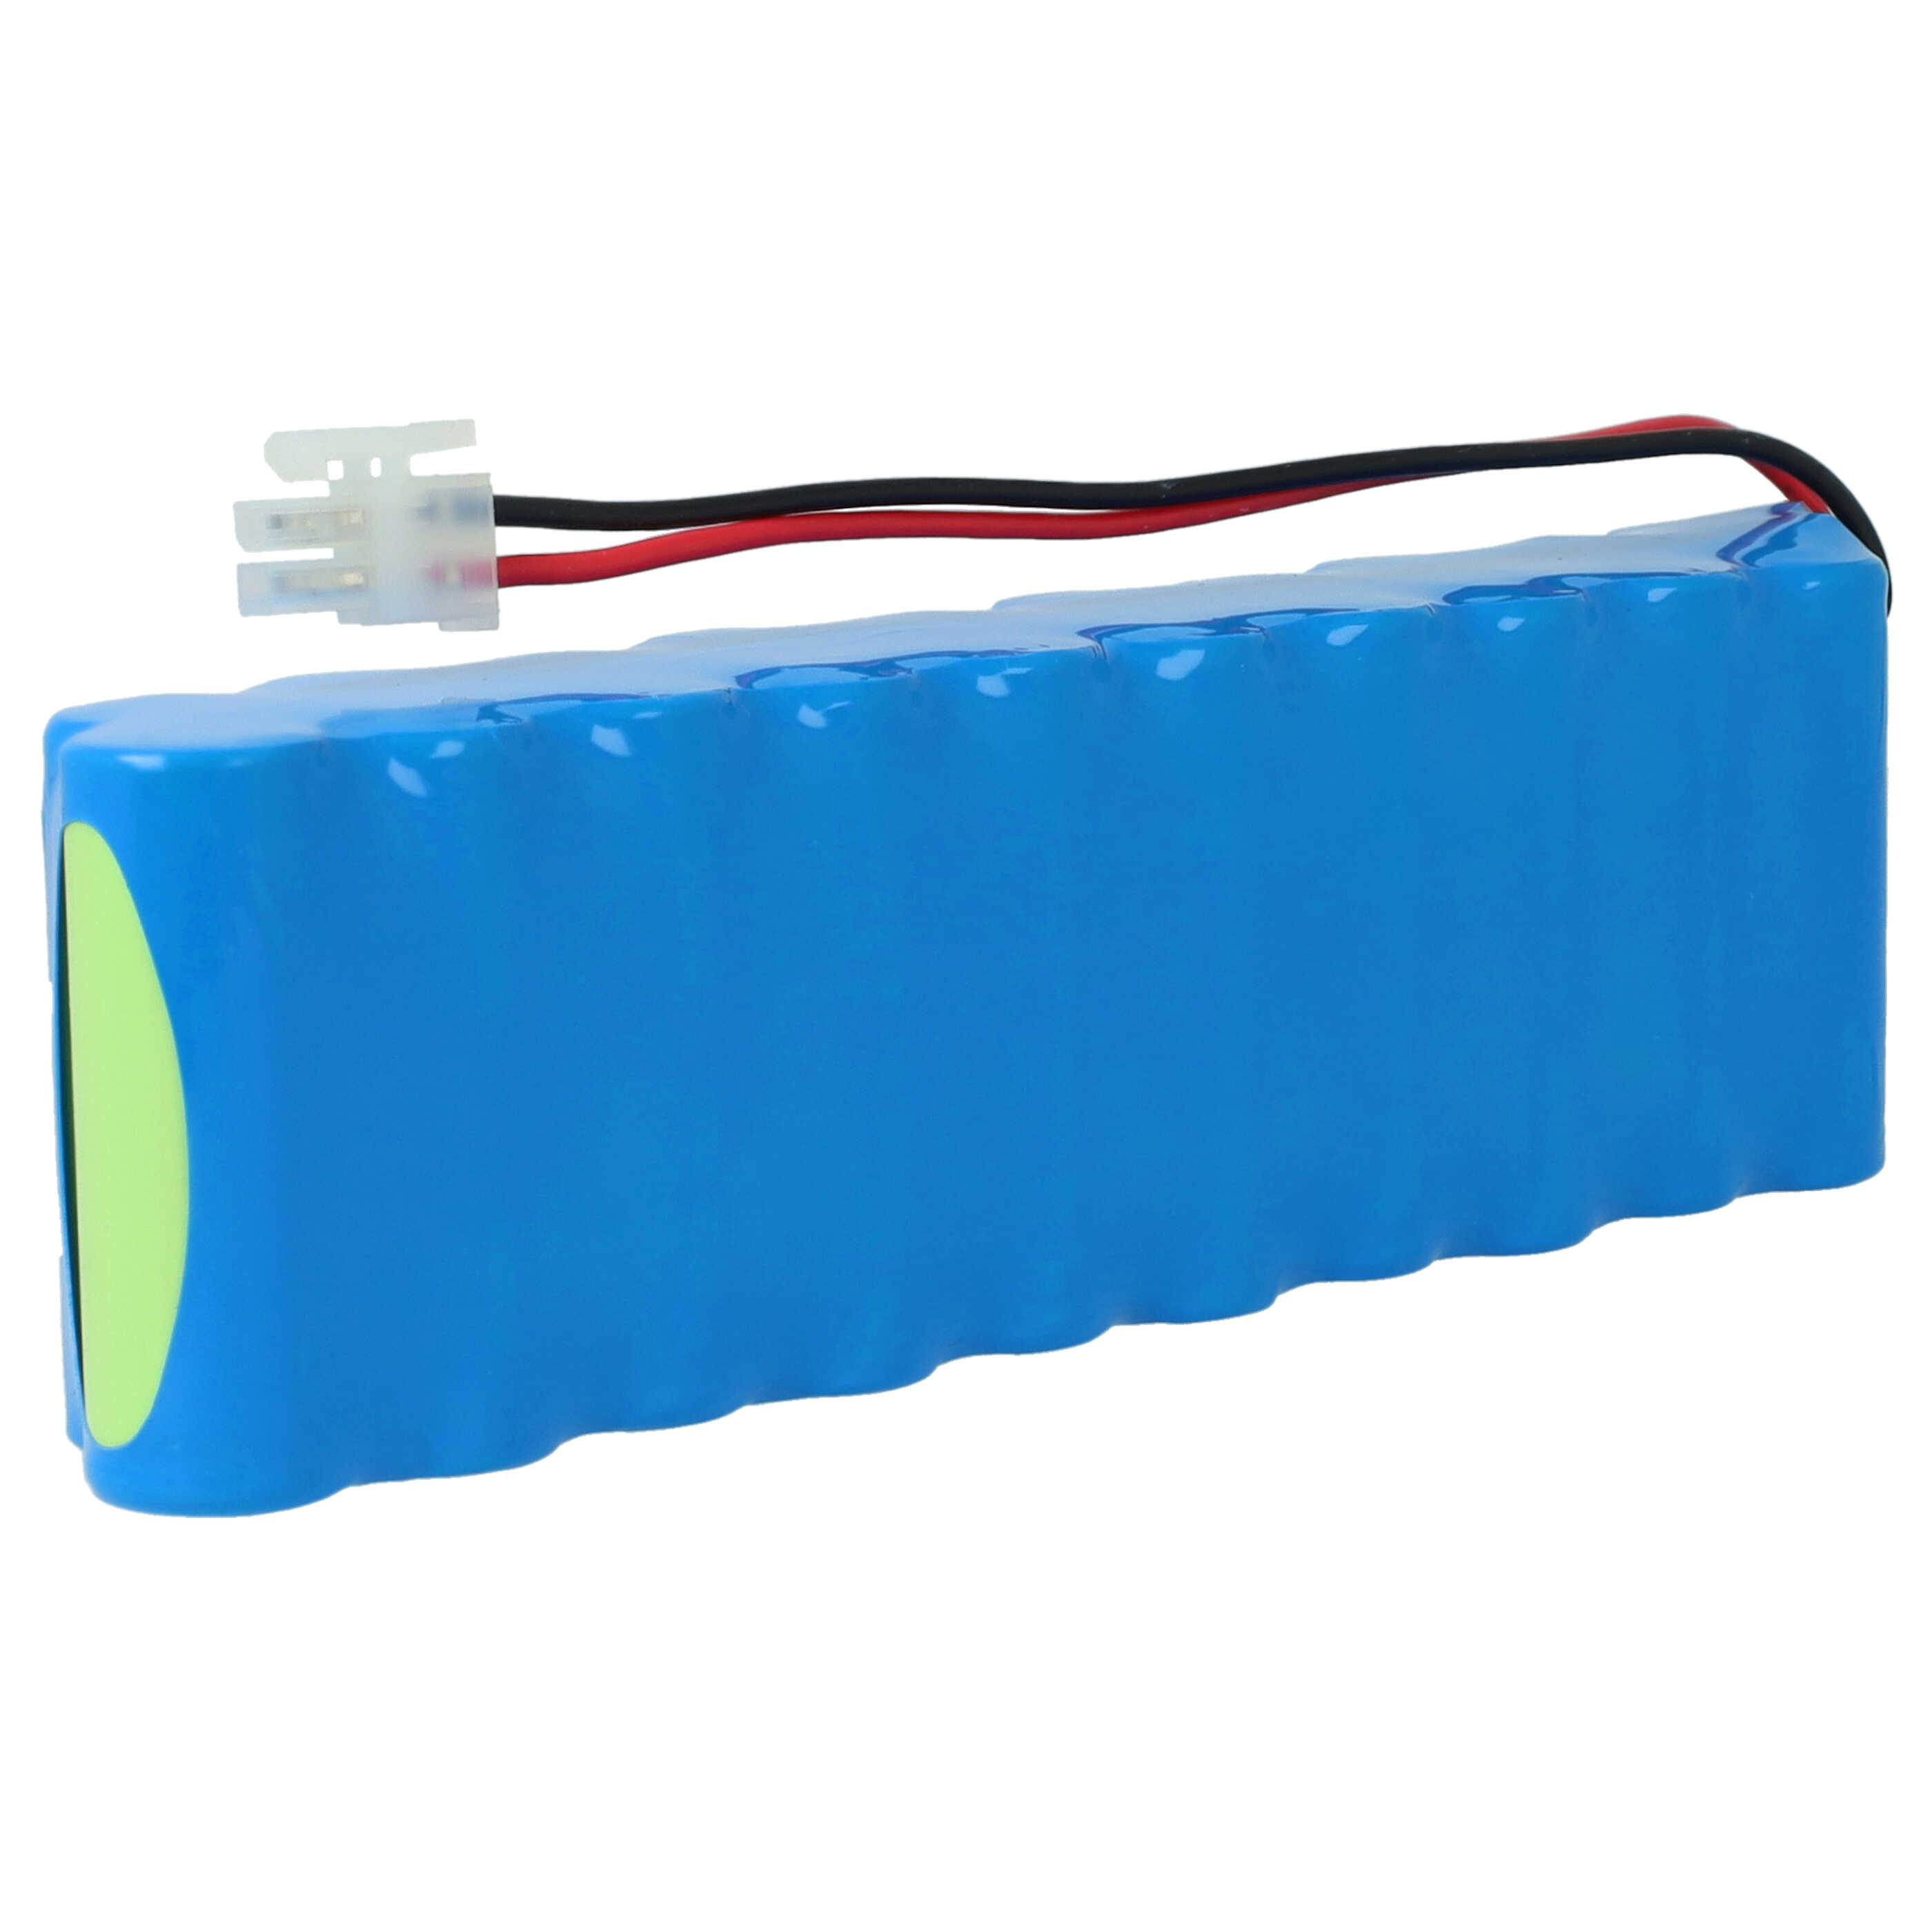 Medical Equipment Battery Replacement for Hillrom 110539 - 2500mAh 24V NiMH